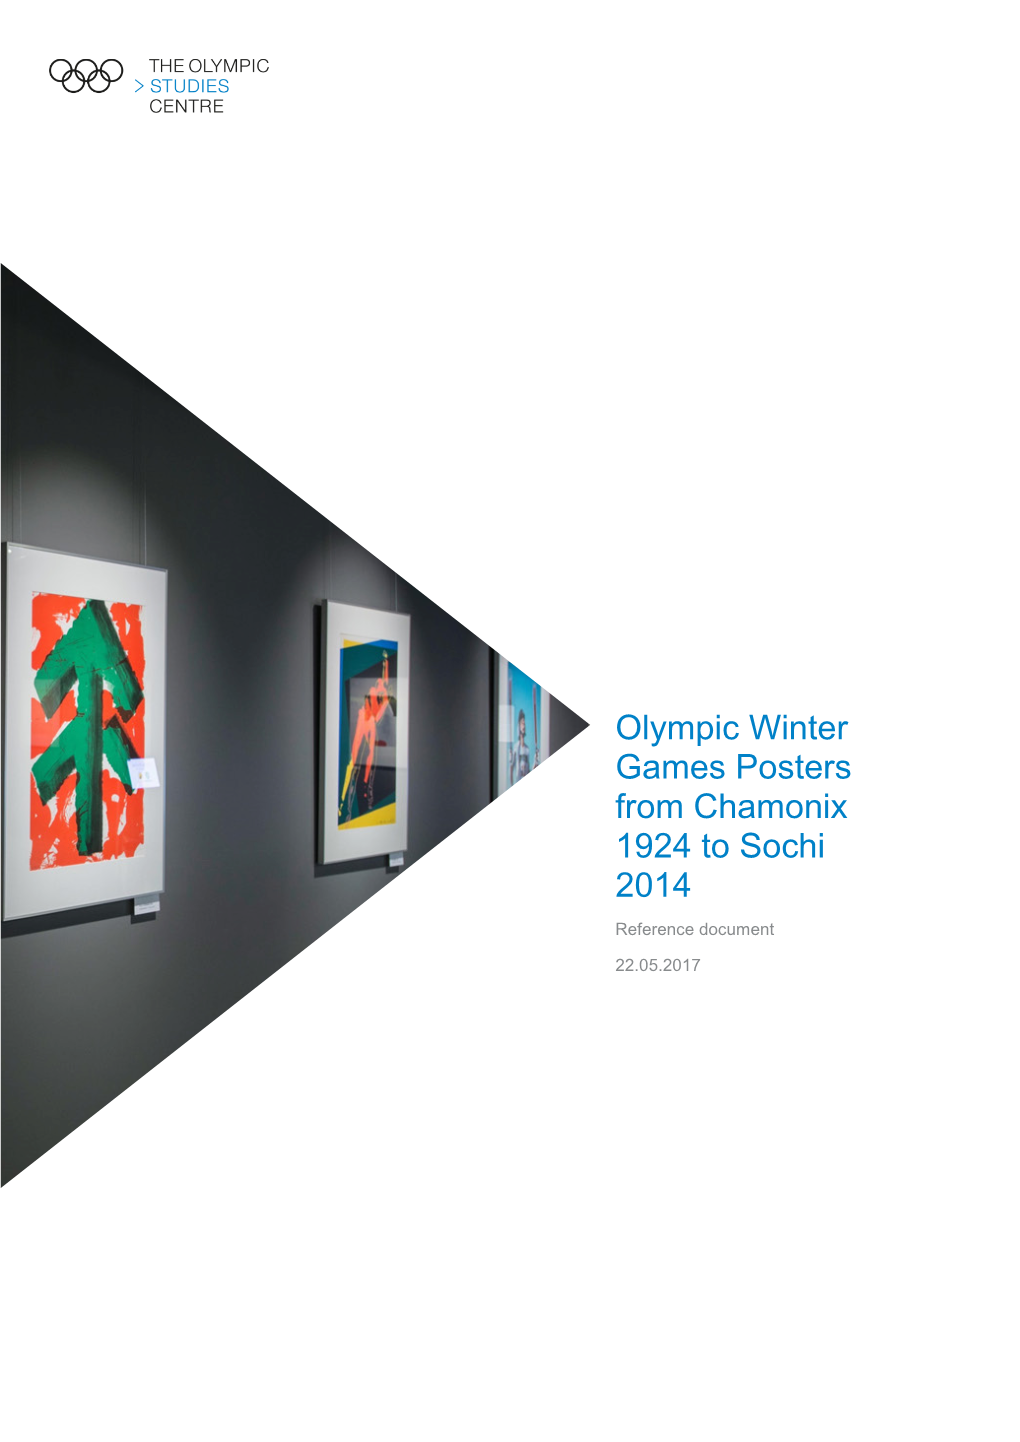 Olympic Winter Games Posters from Chamonix 1924 to Sochi 2014 Reference Document